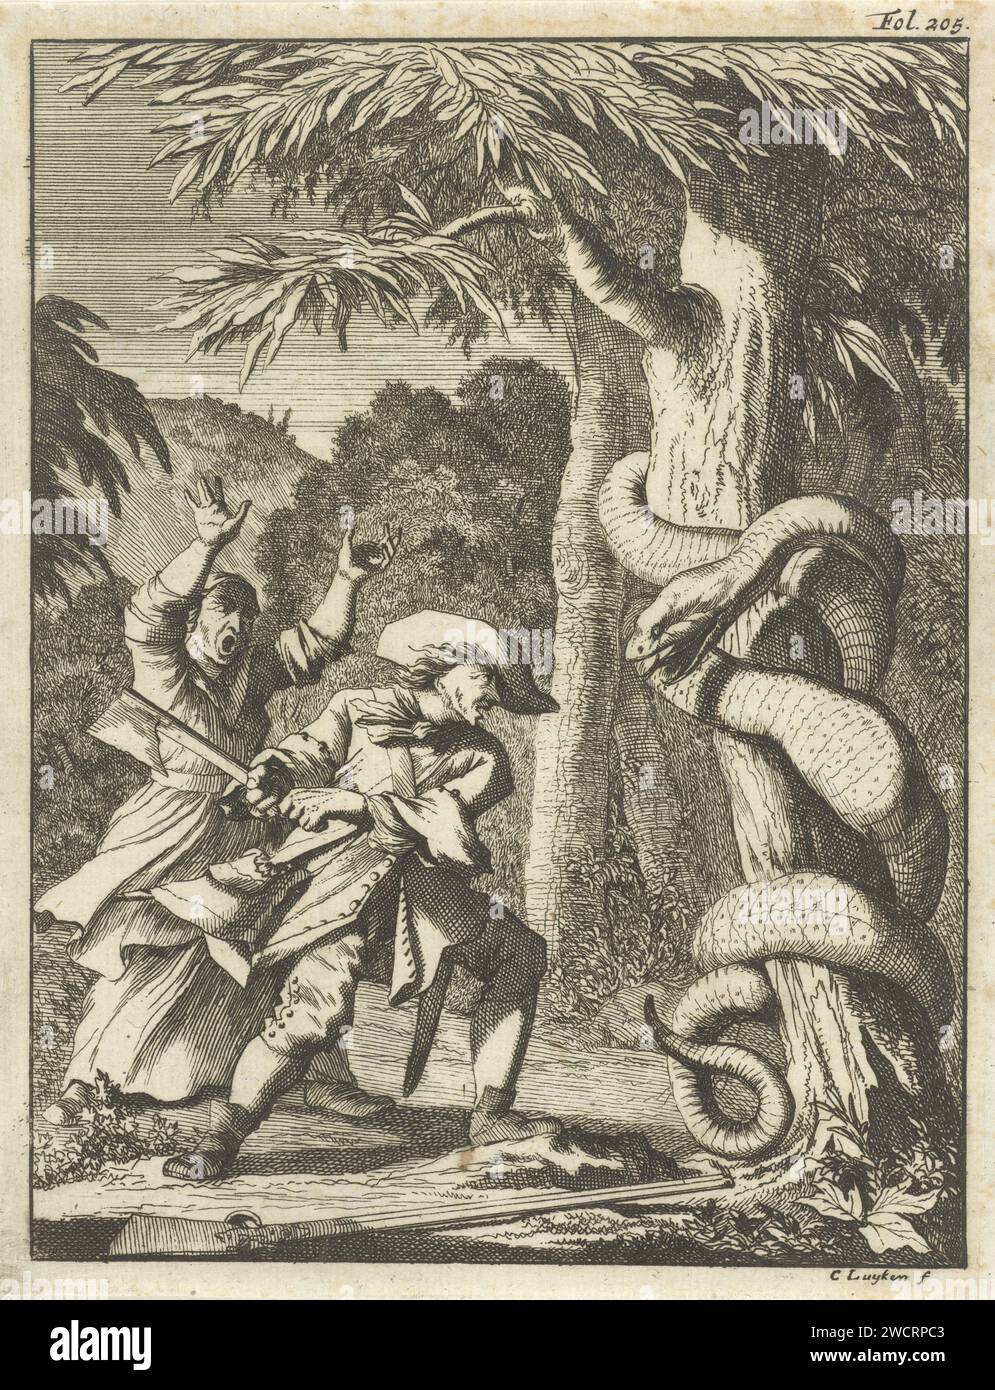 Giant hose, wrinkled around a tree, attacked by a man with ax, Caspar Luyken, 1694 print Print at the top right marked: fol. 205. print maker: Amsterdampublisher: Utrecht paper etching man killing animal. snakes Stock Photo